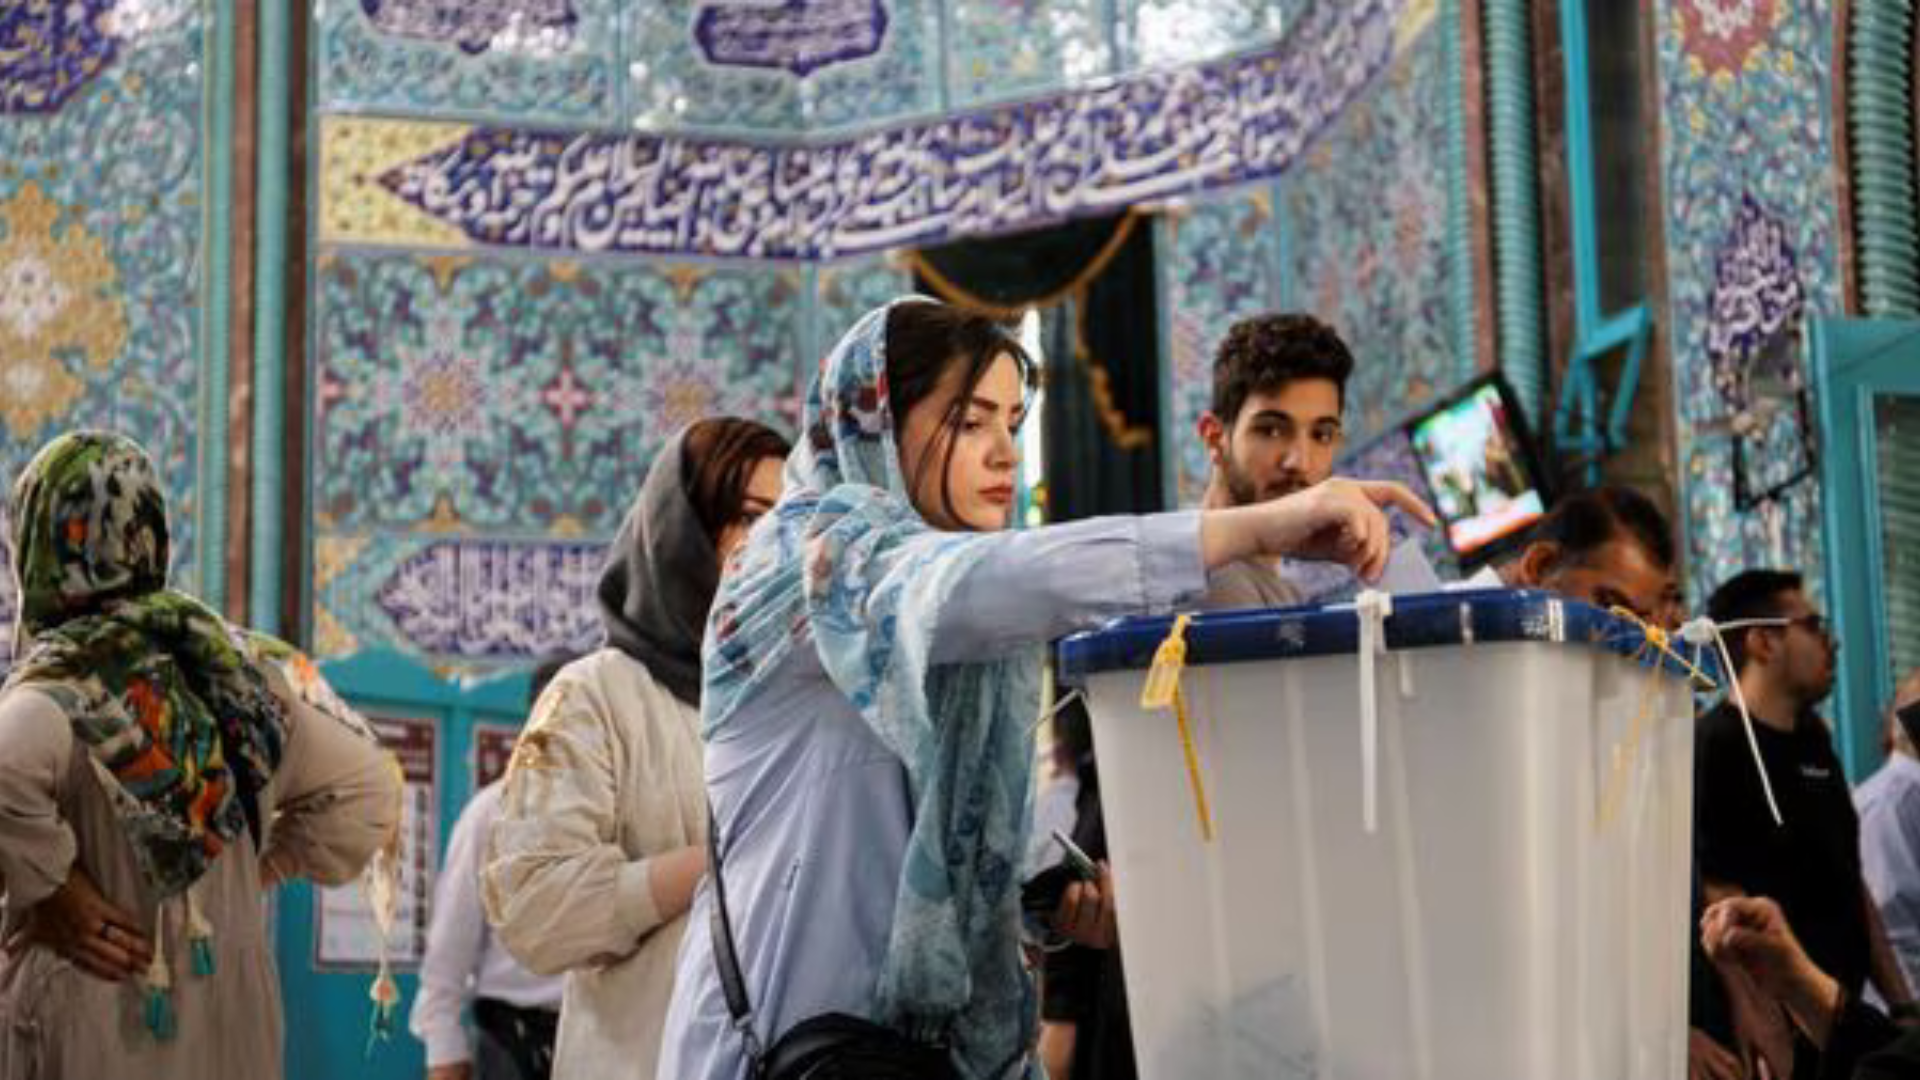 Iran Elections: Voting Extended Keeping Turnout In Mind